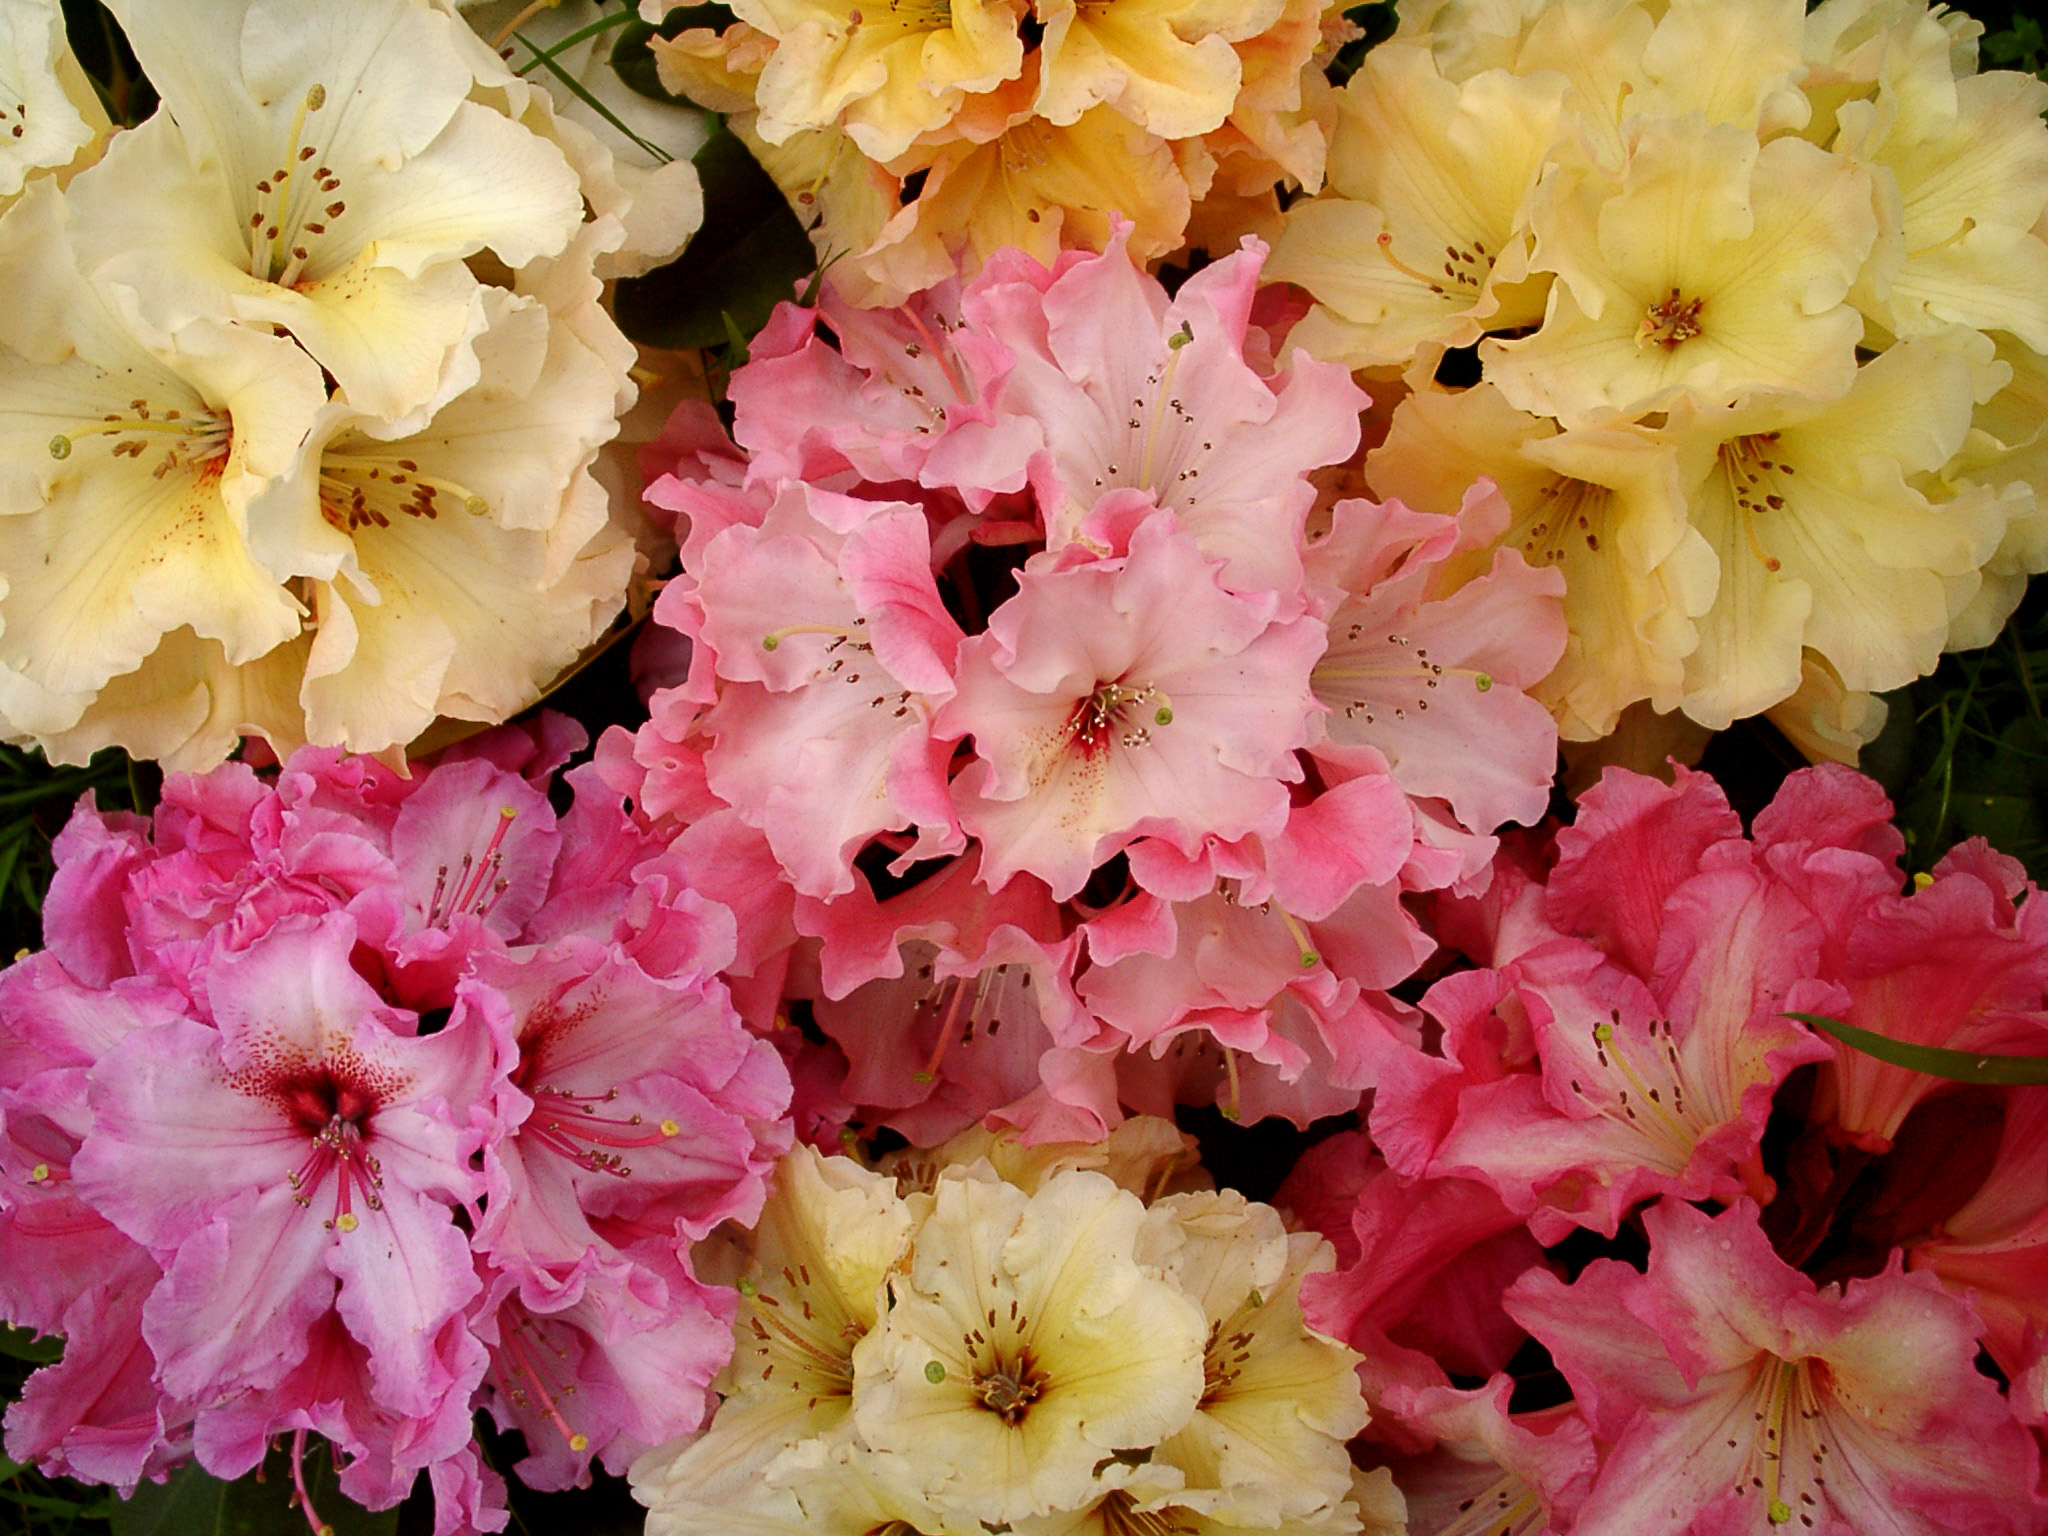 400 varieties of Rhododendron Species and Hybrids, from tiny dwarfs to giant trees.